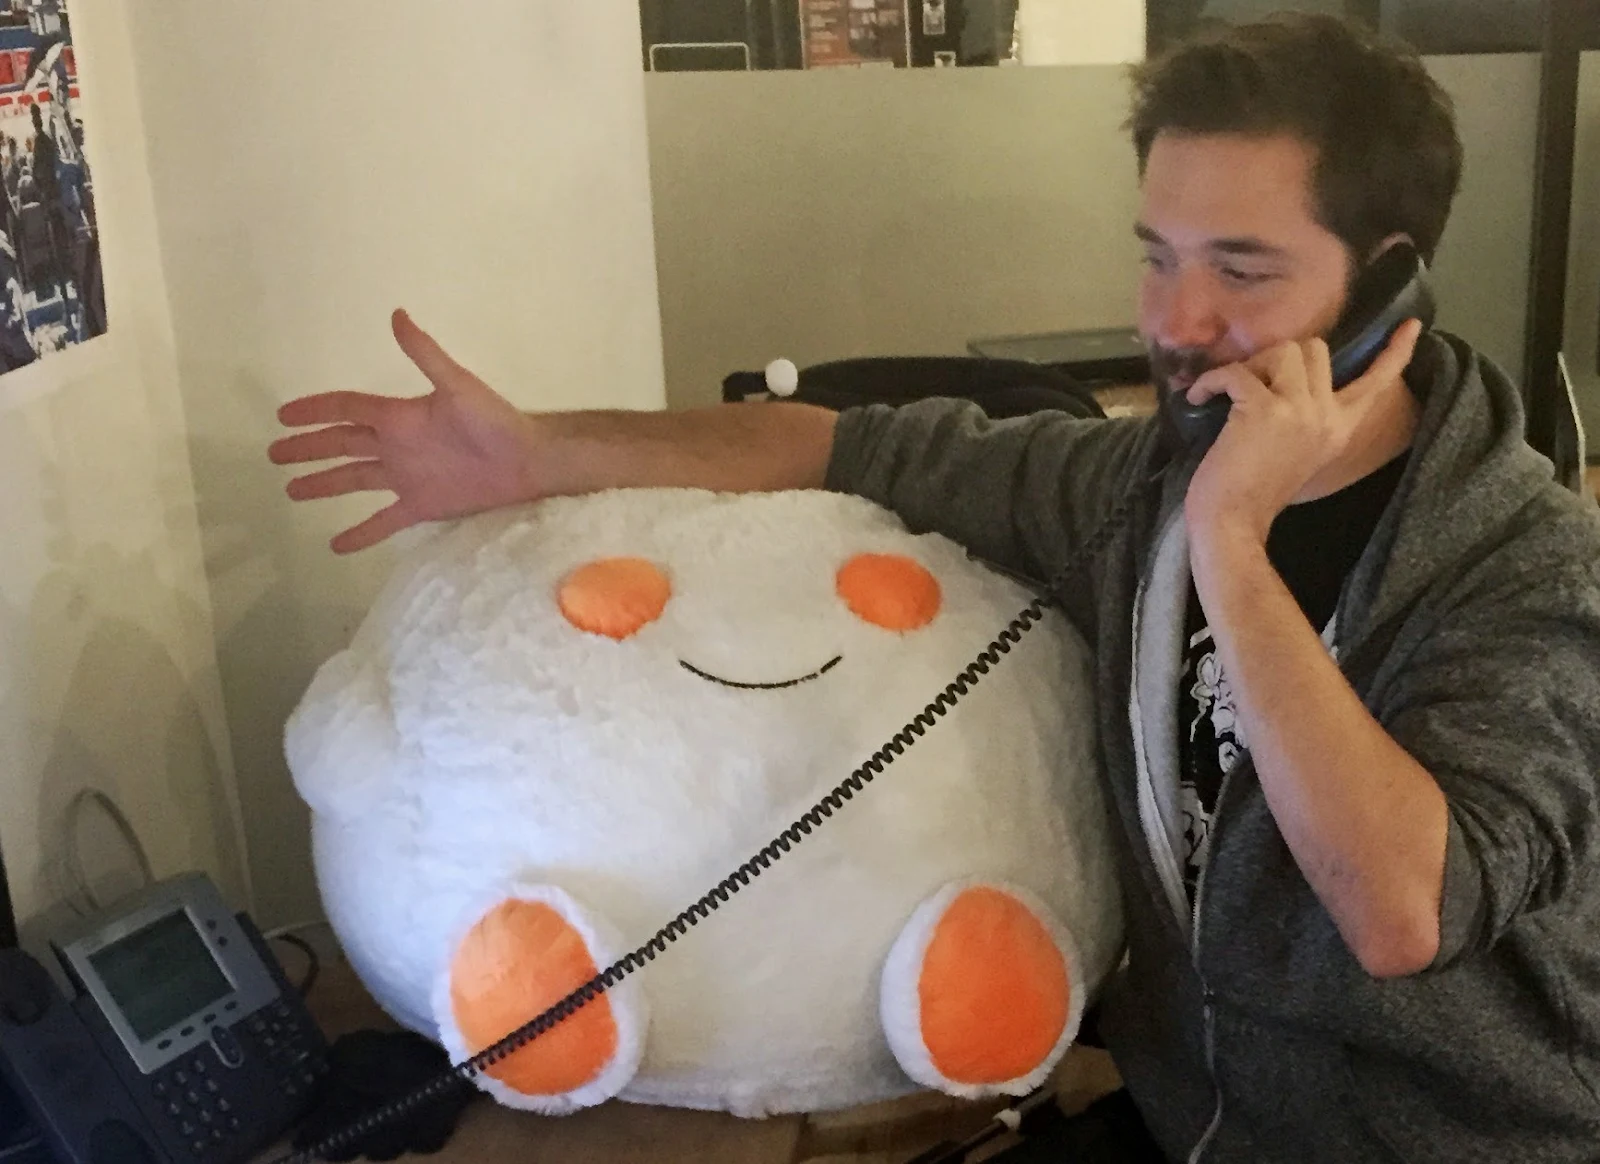 Reddit Co-Founder urges all the Internet Users to Contact FCC Today